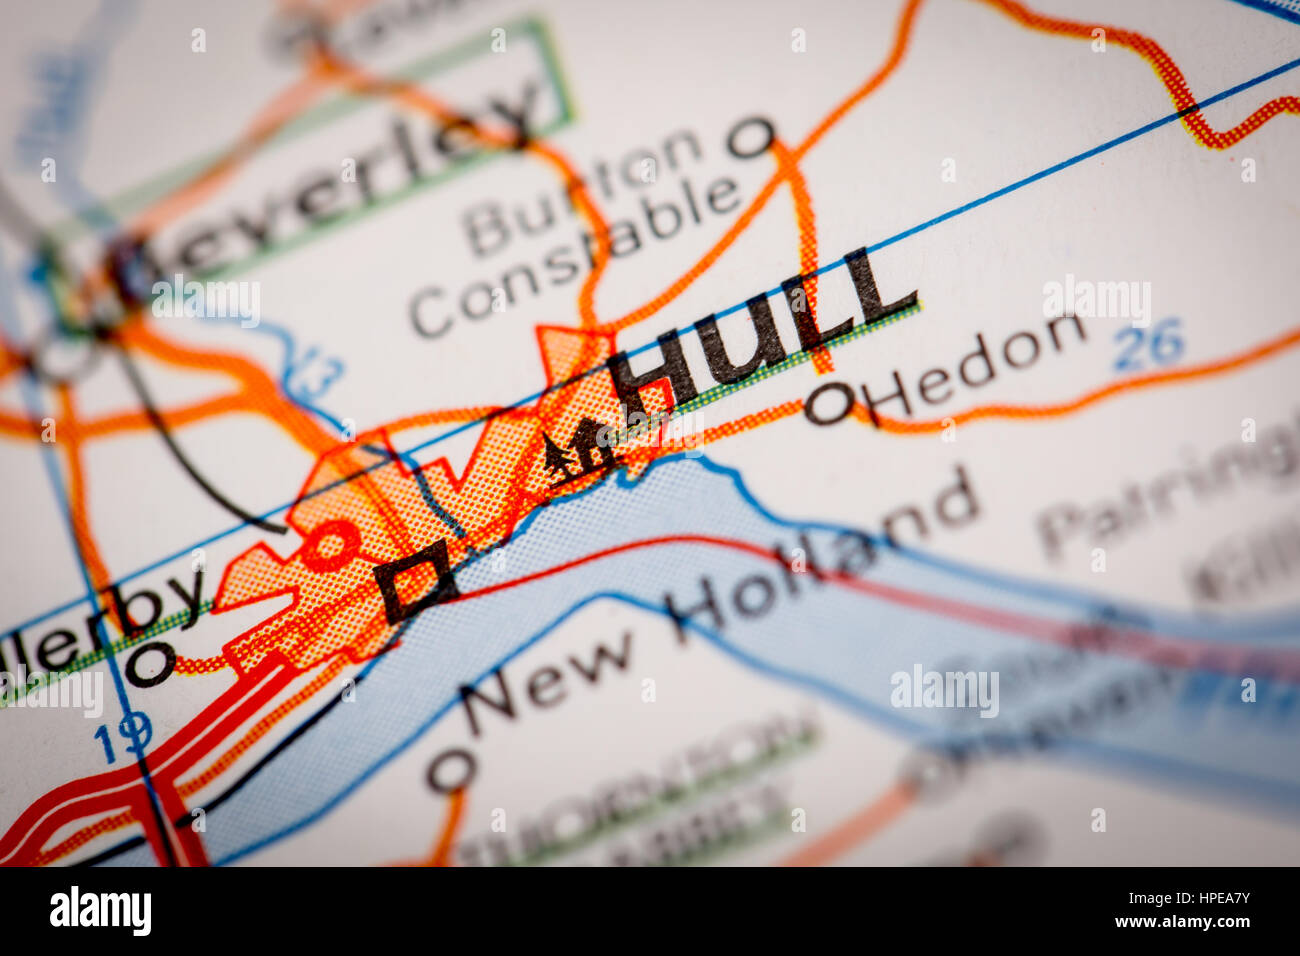 Map Photography: Hull City on a Road Map Stock Photo